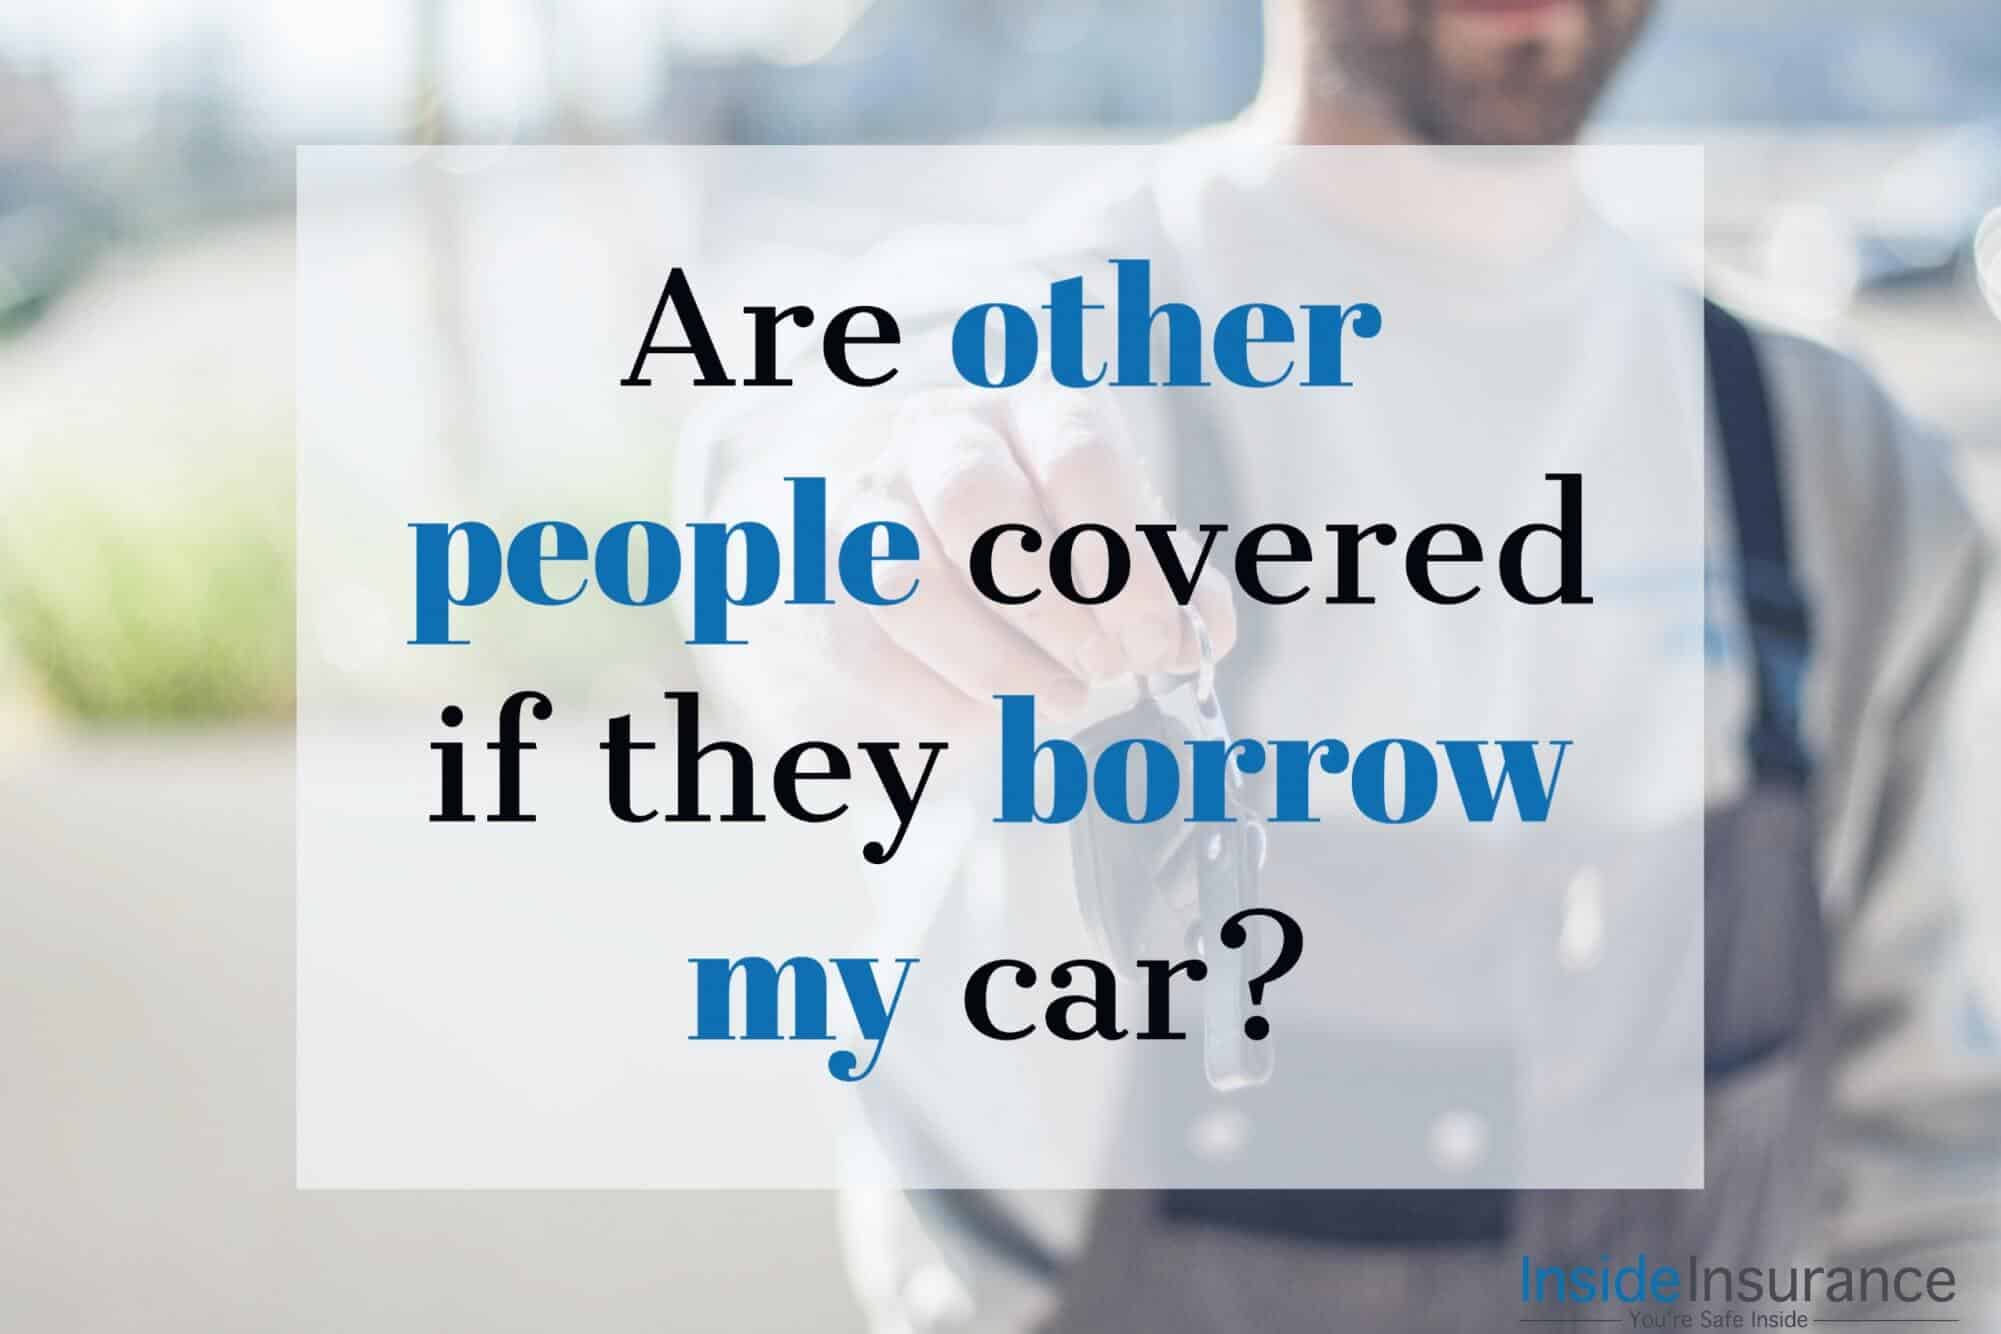 alt="square blurry pic of a guy and a quote that says "Are other people covered if they barrow my car?"